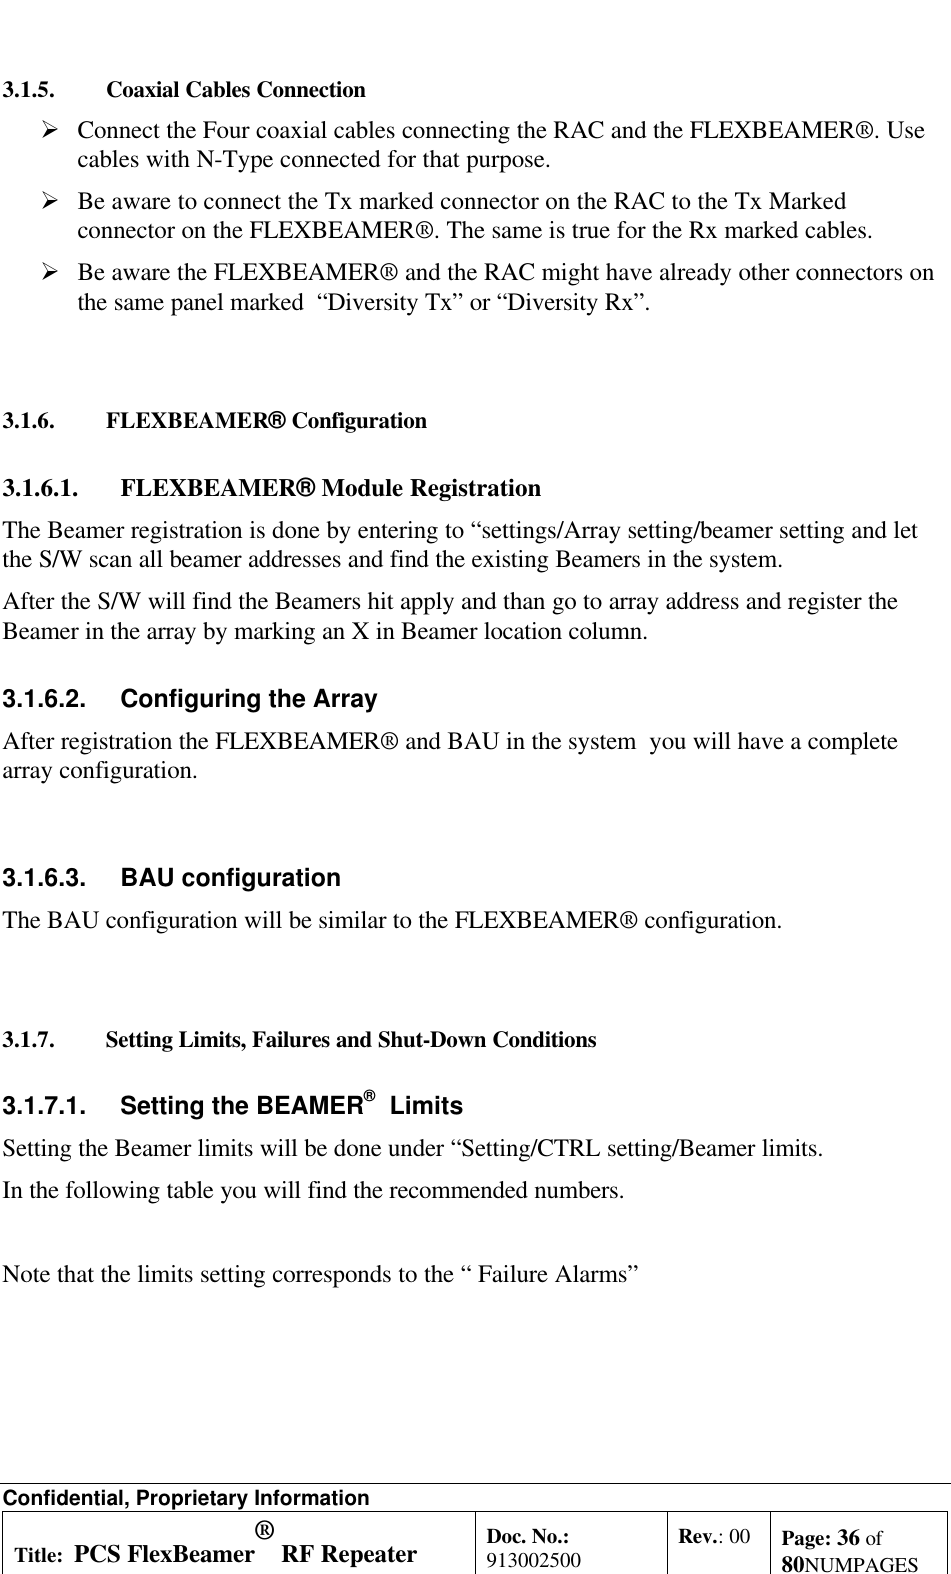 Confidential, Proprietary InformationTitle: PCS FlexBeamer® RF RepeaterSystem A &amp;O ManualDoc. No.:913002500 Rev.: 00 Page: 36 of80NUMPAGES3.1.5. Coaxial Cables ConnectionØ Connect the Four coaxial cables connecting the RAC and the FLEXBEAMER®. Usecables with N-Type connected for that purpose.Ø Be aware to connect the Tx marked connector on the RAC to the Tx Markedconnector on the FLEXBEAMER®. The same is true for the Rx marked cables.Ø Be aware the FLEXBEAMER® and the RAC might have already other connectors onthe same panel marked  “Diversity Tx” or “Diversity Rx”.3.1.6. FLEXBEAMER® Configuration3.1.6.1. FLEXBEAMER® Module RegistrationThe Beamer registration is done by entering to “settings/Array setting/beamer setting and letthe S/W scan all beamer addresses and find the existing Beamers in the system.After the S/W will find the Beamers hit apply and than go to array address and register theBeamer in the array by marking an X in Beamer location column.3.1.6.2. Configuring the ArrayAfter registration the FLEXBEAMER® and BAU in the system  you will have a completearray configuration.3.1.6.3. BAU configurationThe BAU configuration will be similar to the FLEXBEAMER® configuration.3.1.7. Setting Limits, Failures and Shut-Down Conditions3.1.7.1. Setting the BEAMER®  LimitsSetting the Beamer limits will be done under “Setting/CTRL setting/Beamer limits.In the following table you will find the recommended numbers.Note that the limits setting corresponds to the “ Failure Alarms”